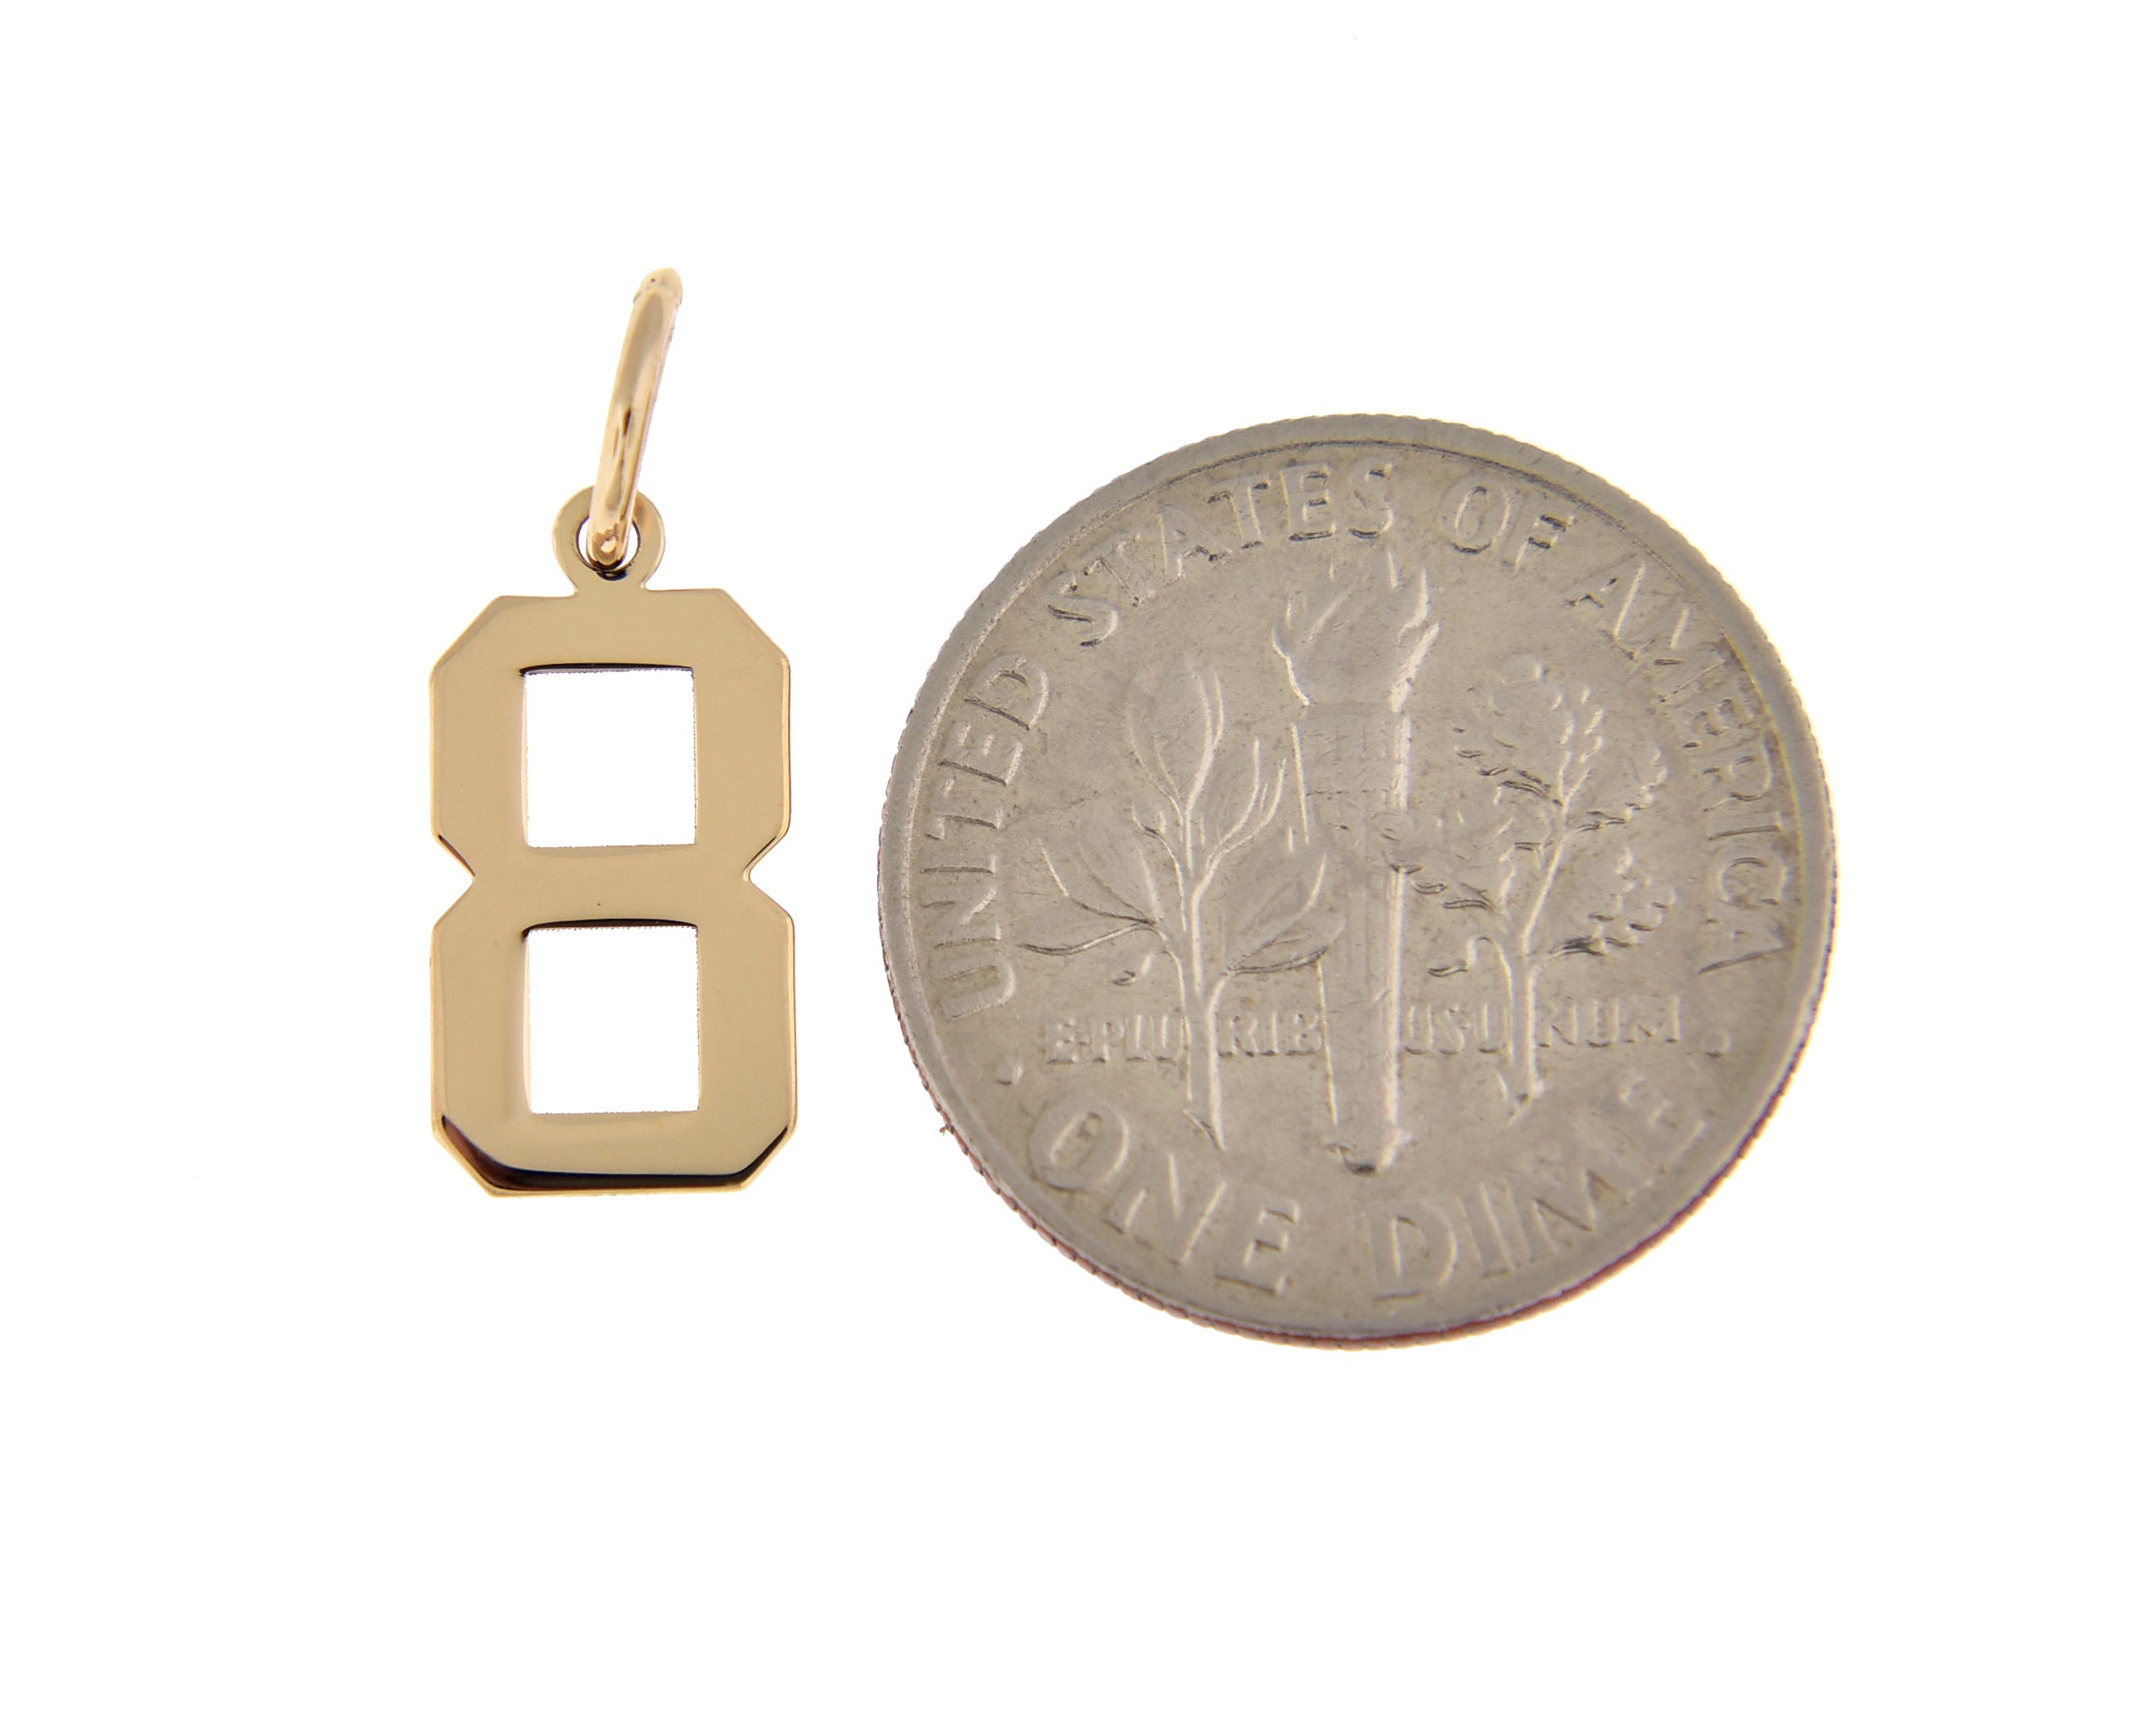 14k Yellow Gold Number 8 Eight Pendant Charm